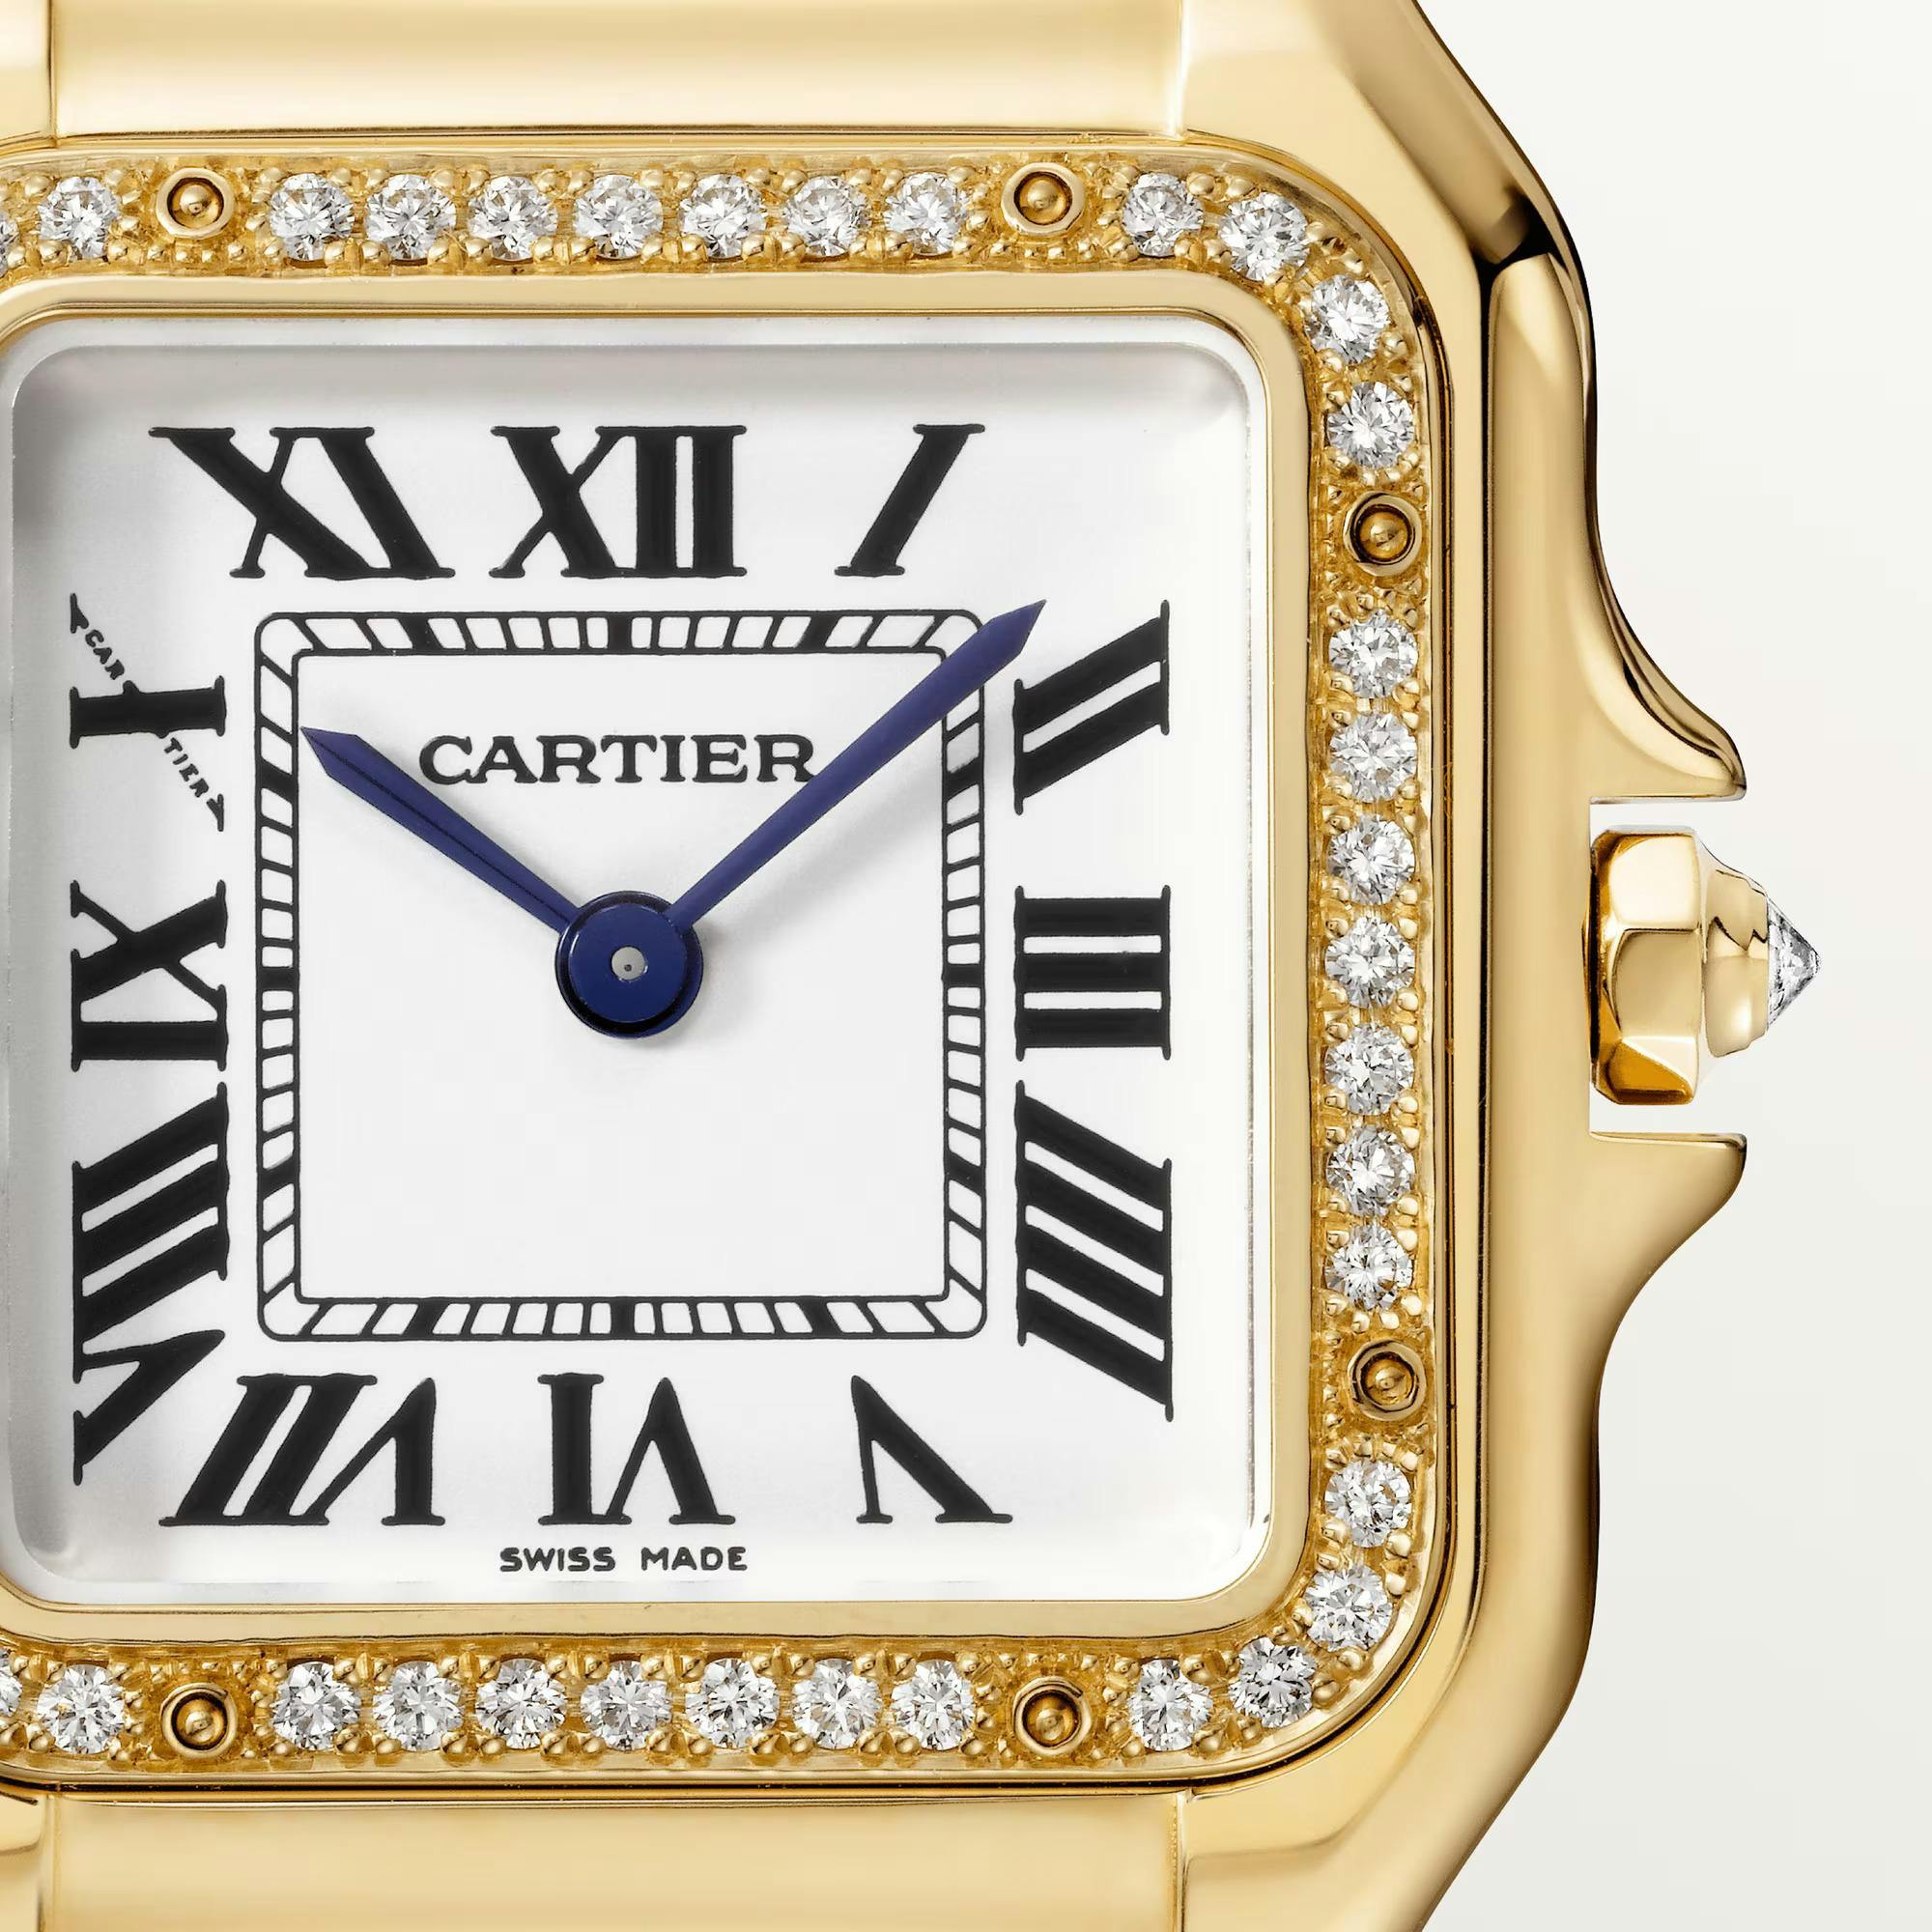 Panthere de Cartier Watch in Yellow Gold with Diamonds, medium model 3